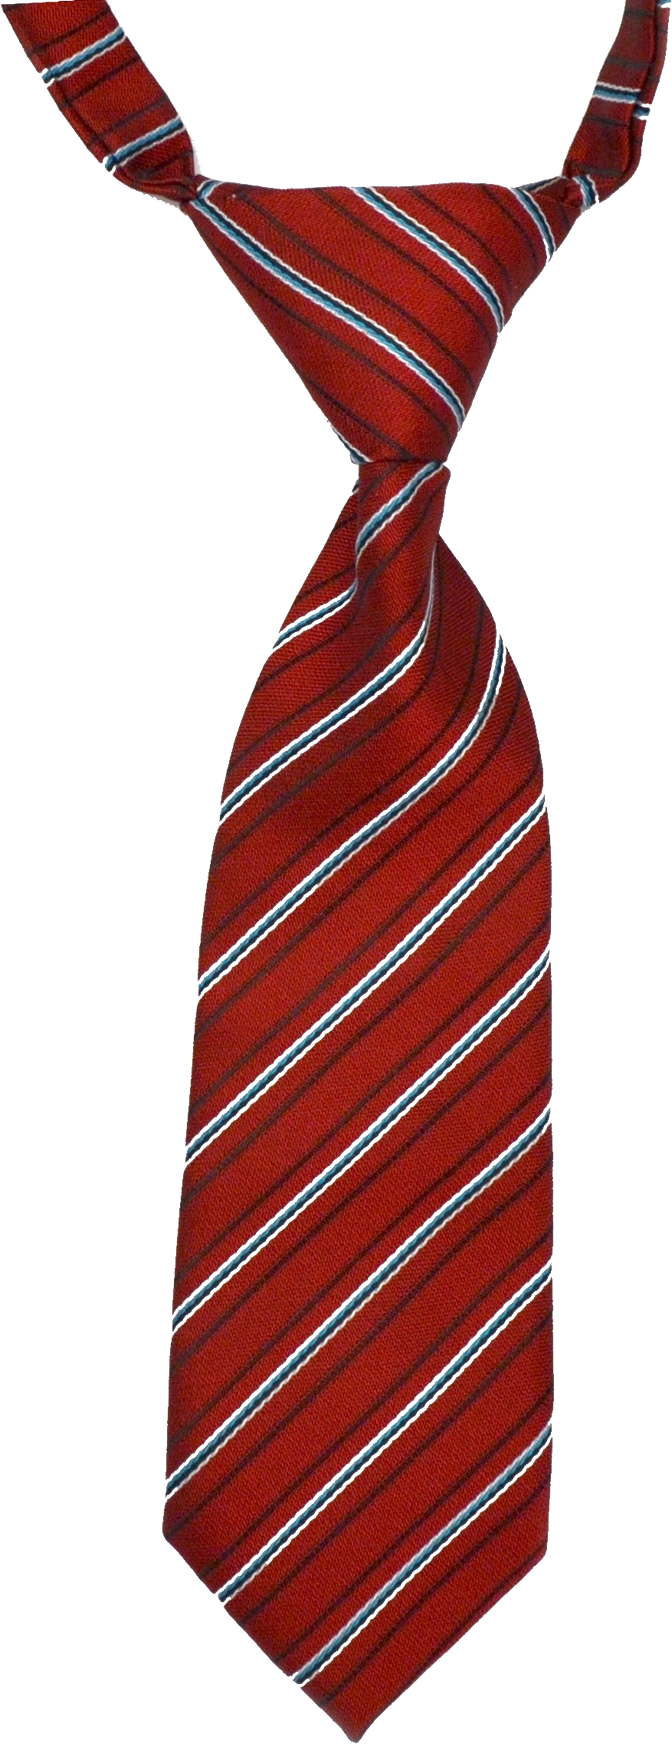 red tie clipart clipart suggest #23631